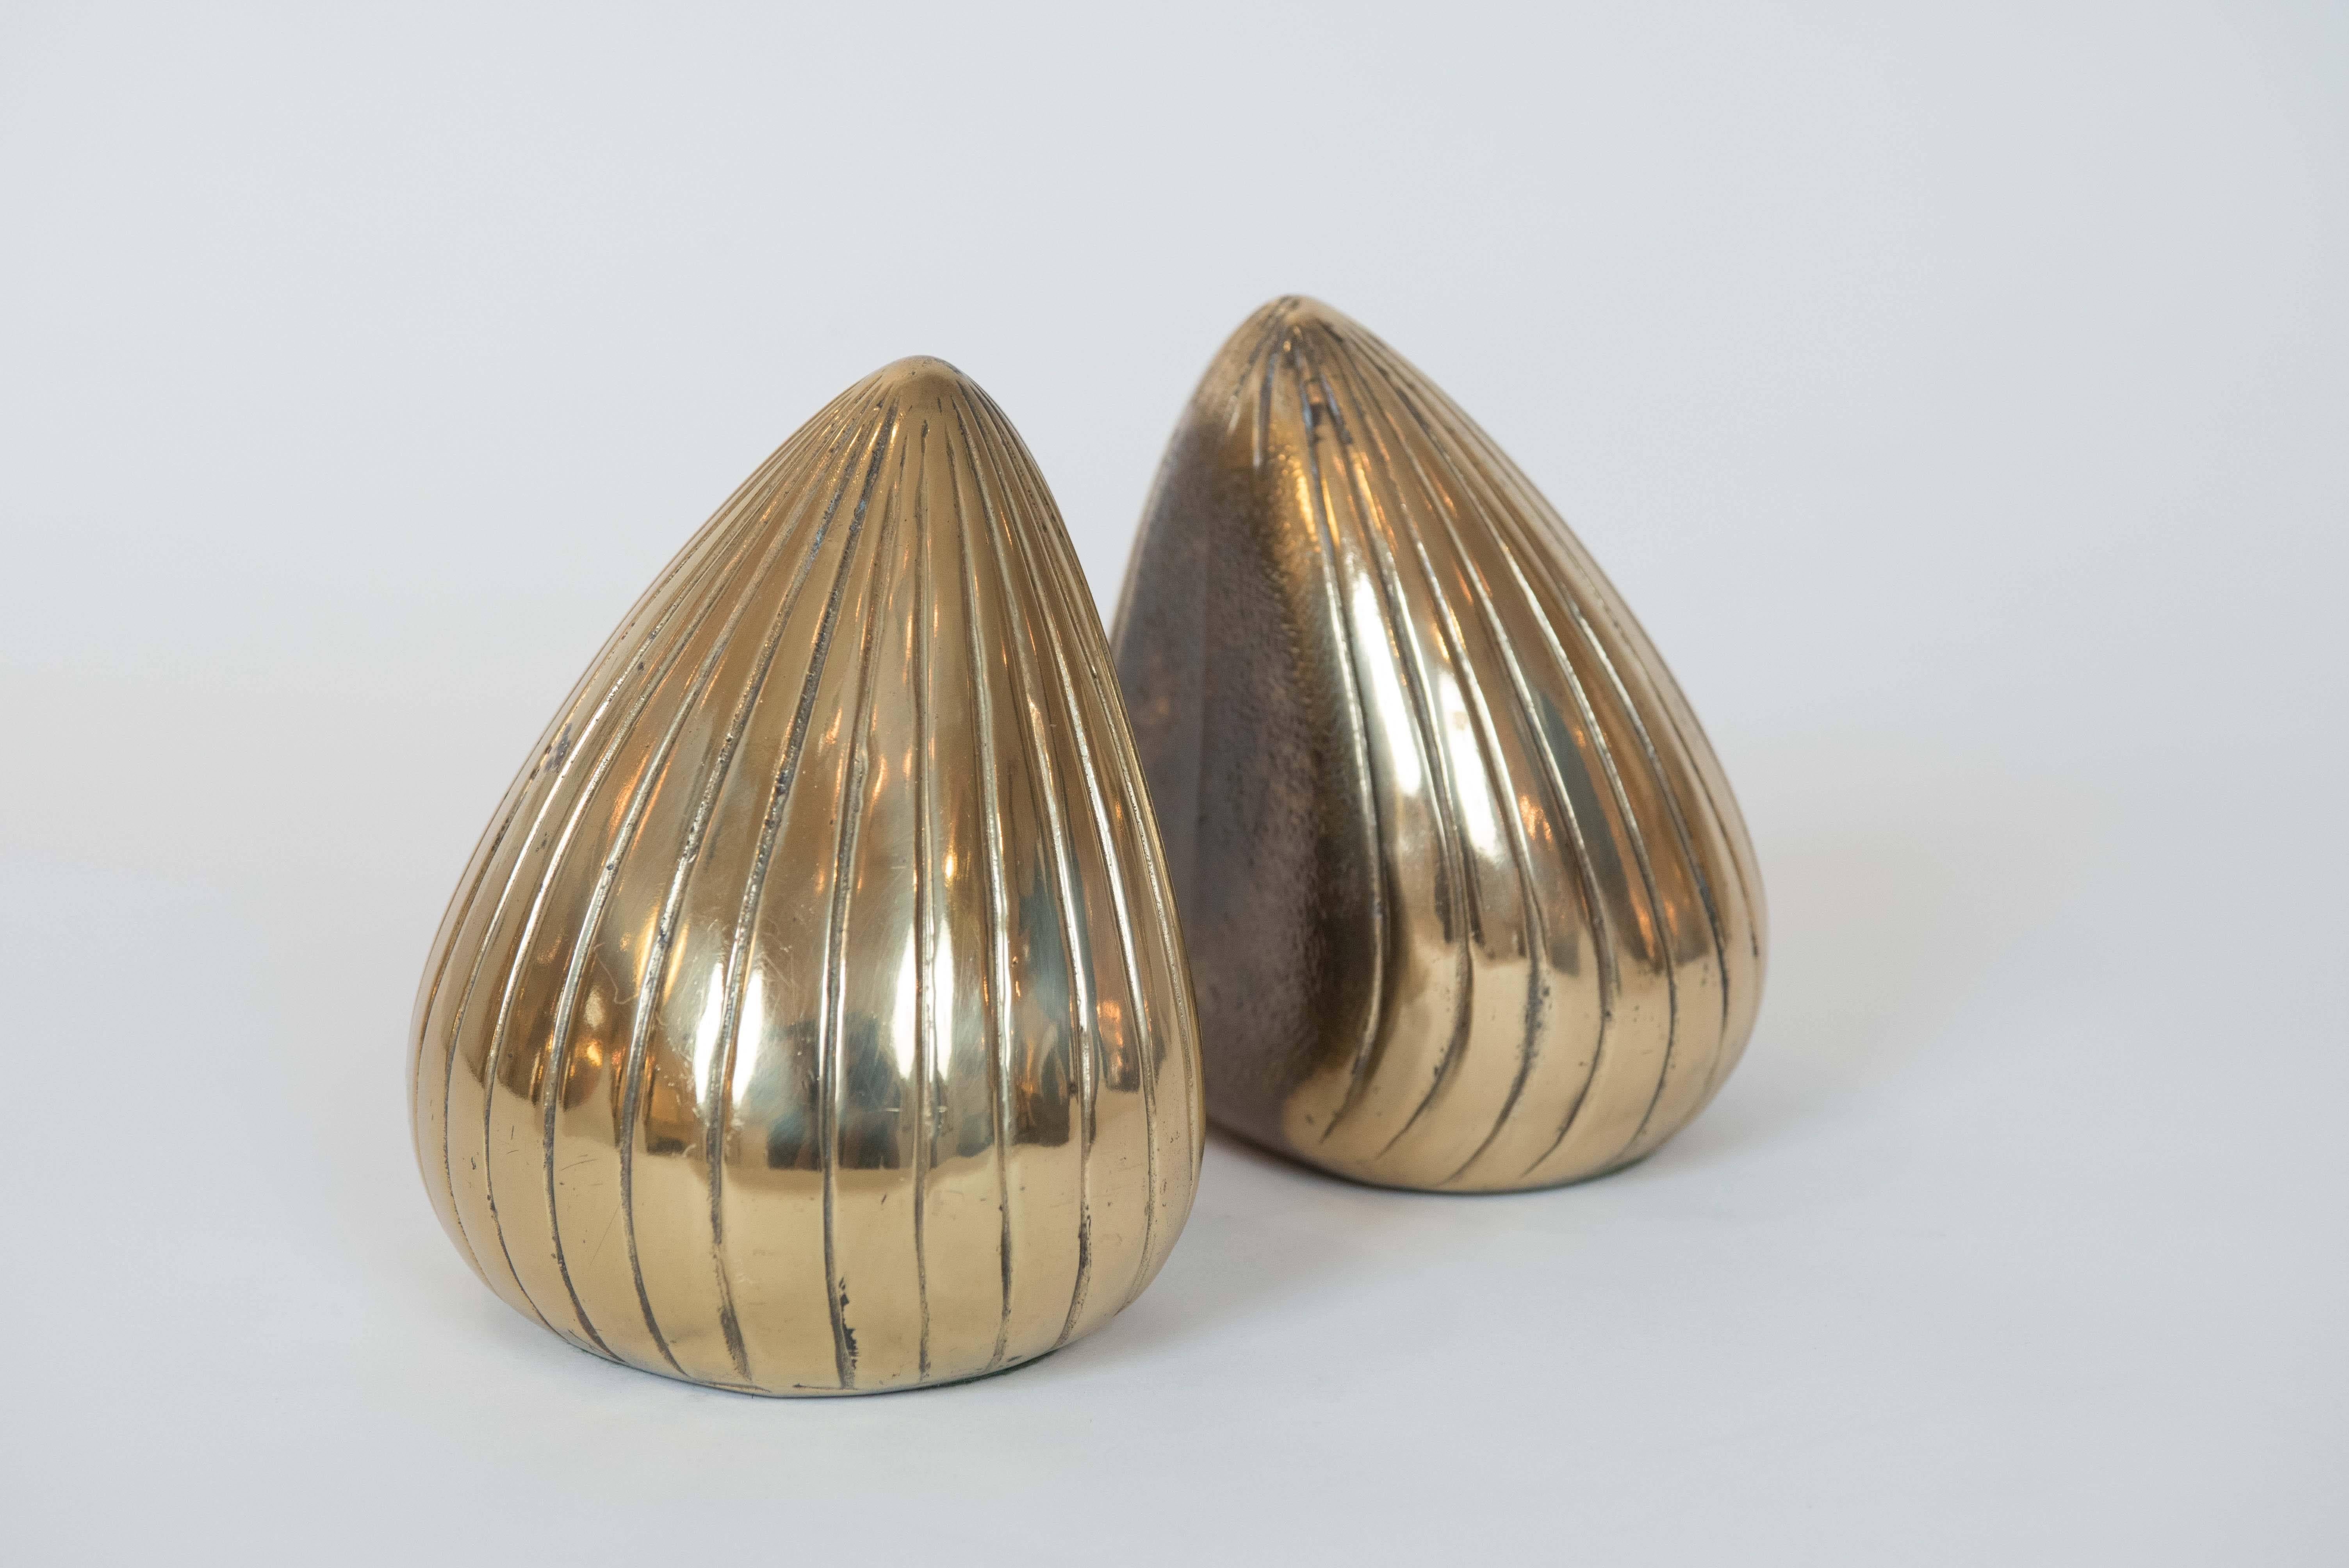 American Pair of Brass Bookends by Ben Seibel for Jenfredware, New York